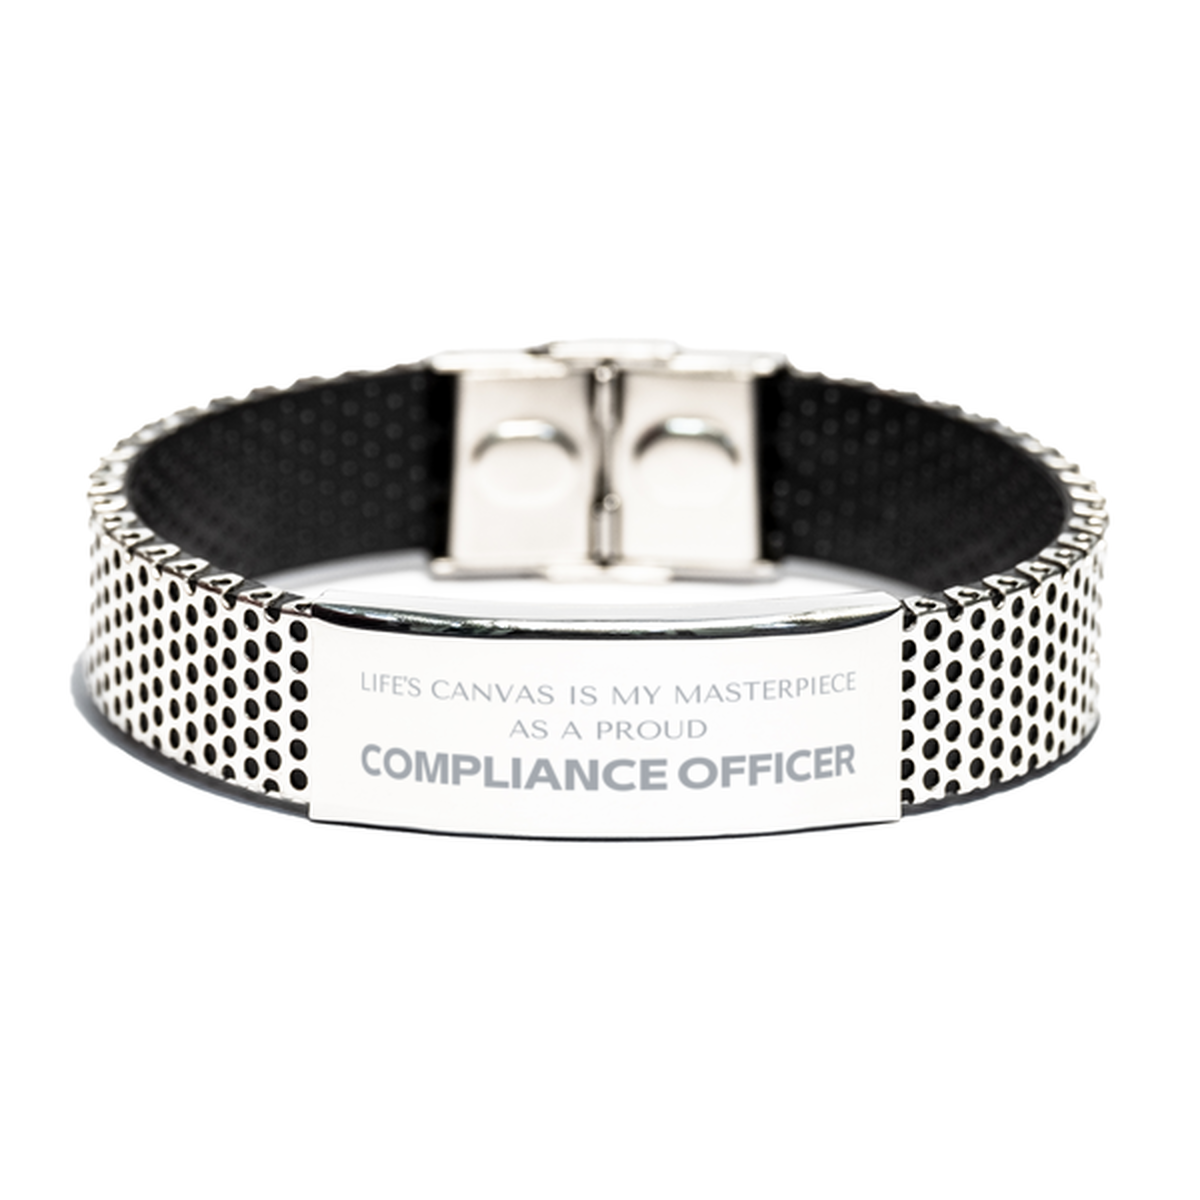 Proud Compliance Officer Gifts, Life's canvas is my masterpiece, Epic Birthday Christmas Unique Stainless Steel Bracelet For Compliance Officer, Coworkers, Men, Women, Friends